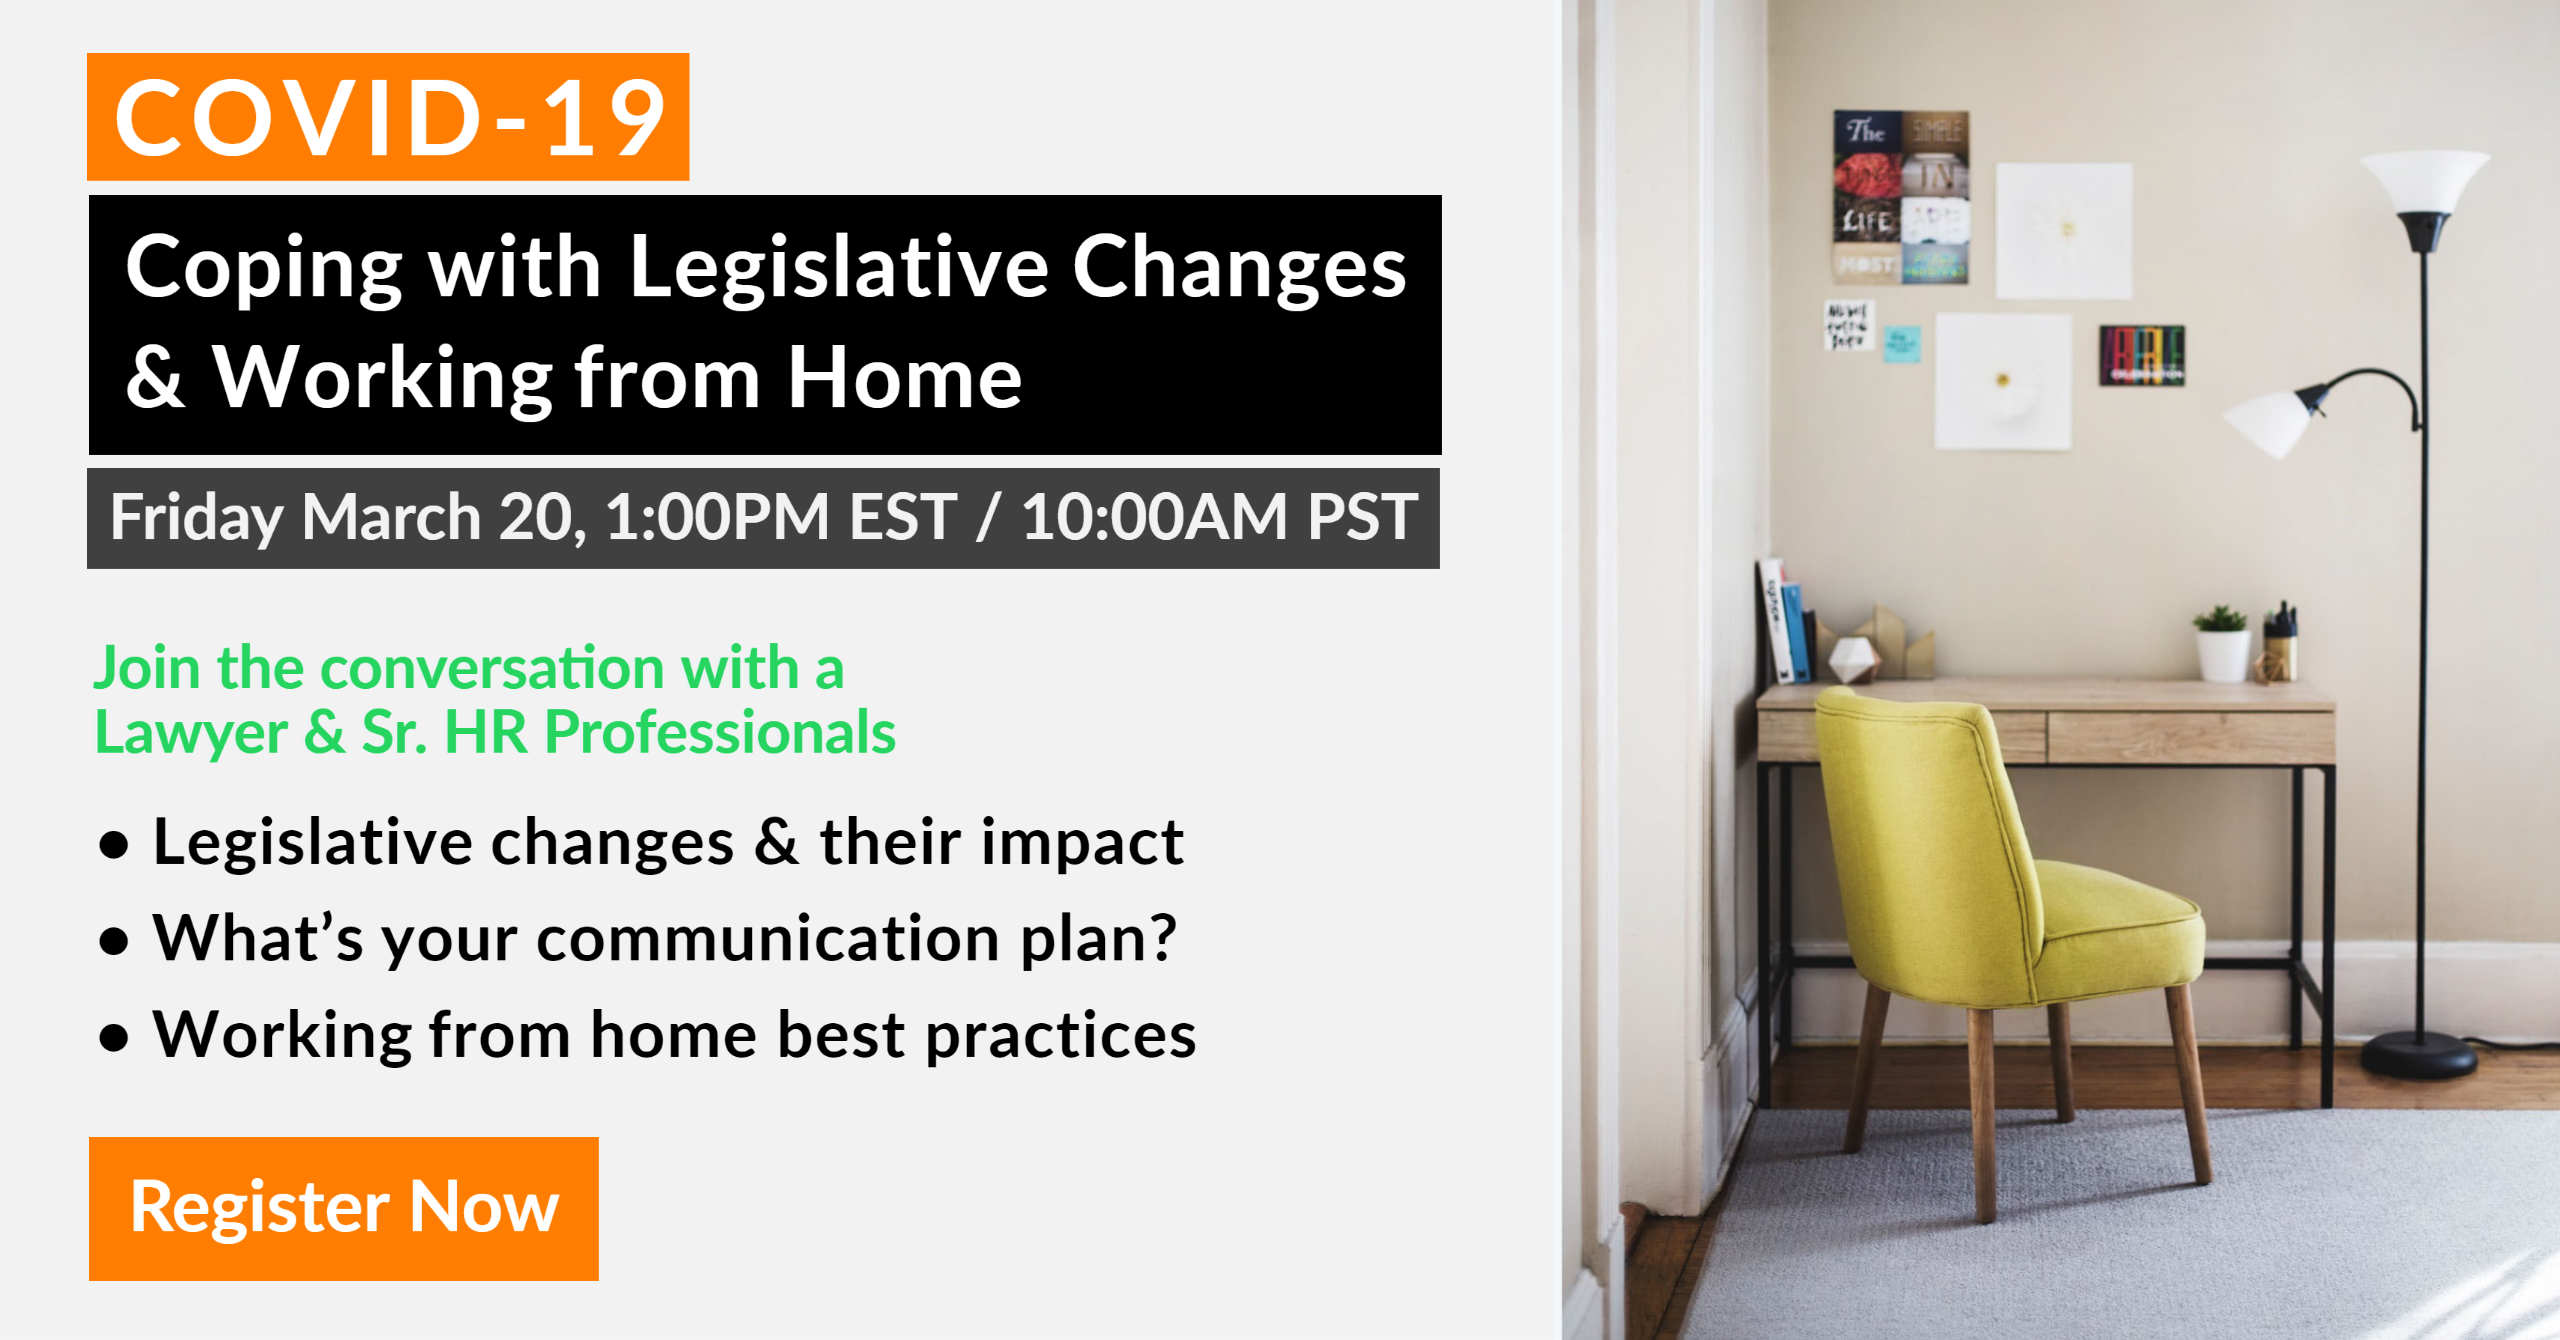 COVID-19 - Coping with Legislative Changes & Working from Home